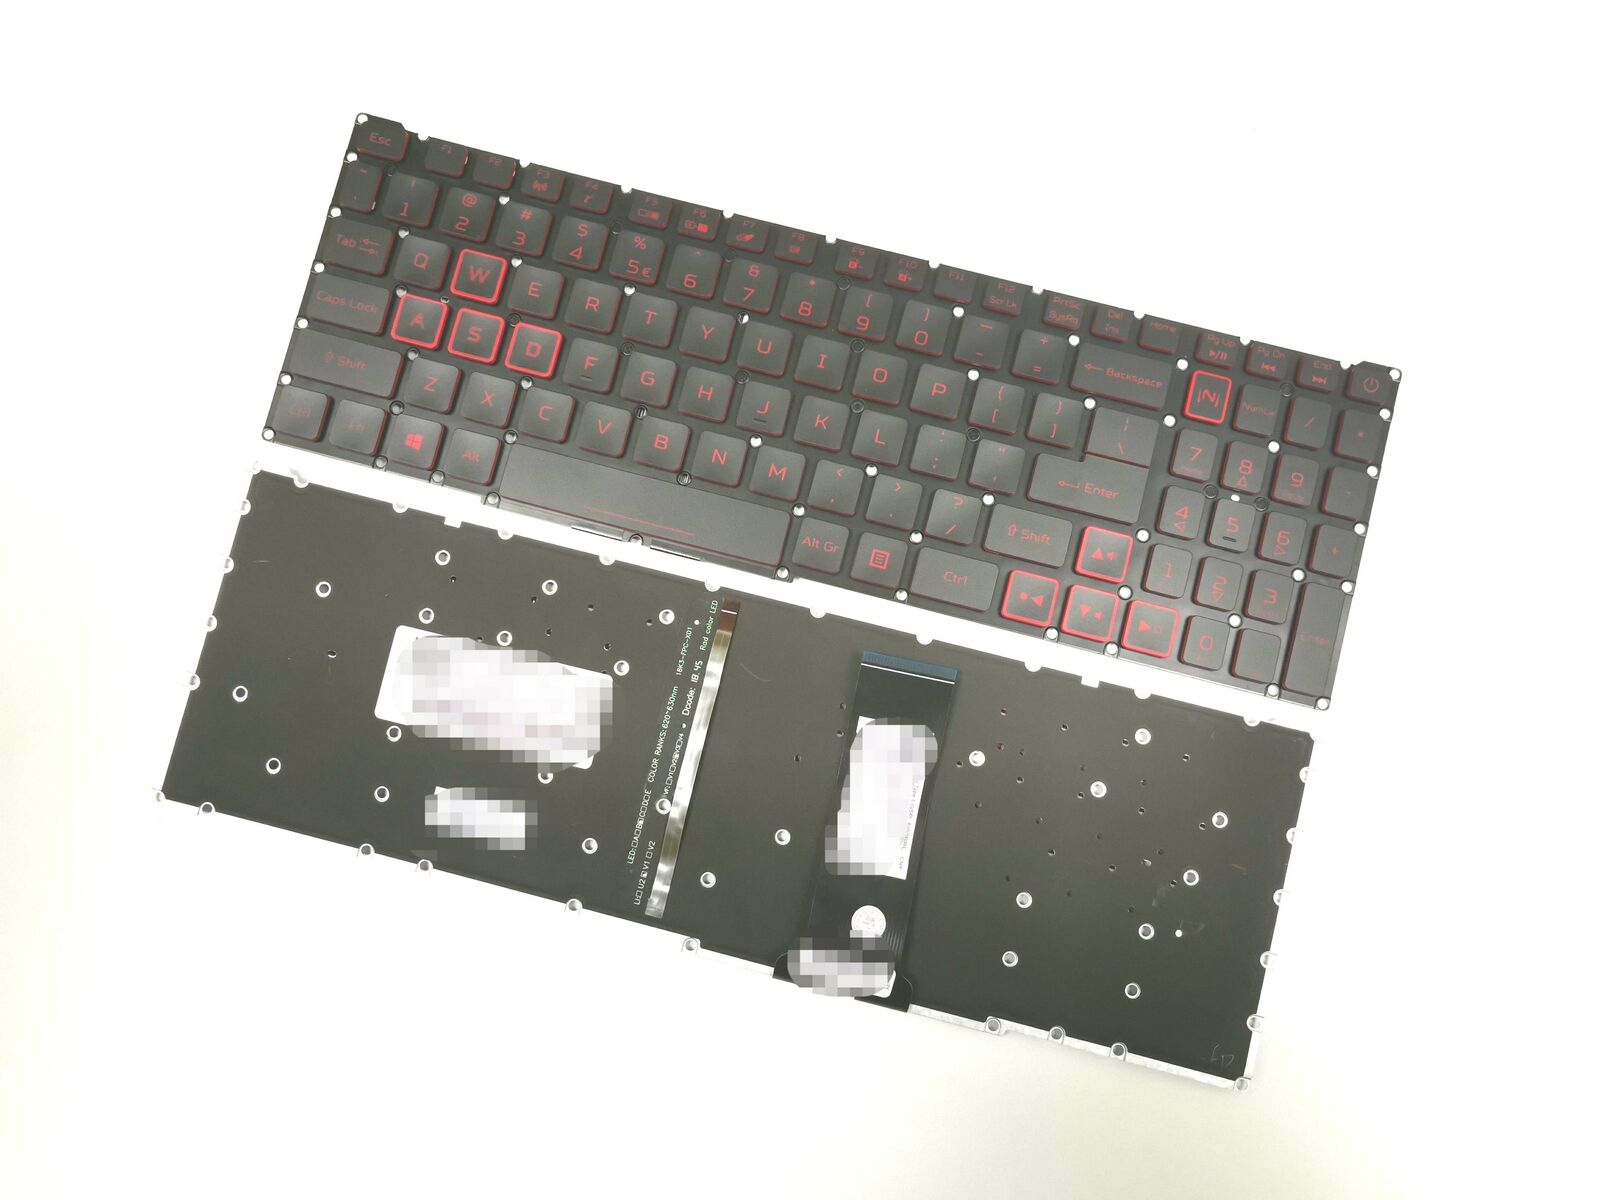 New US red Backlit Keyboard for Acer Nitro 5 AN515-45 AN515-55 N20C1 laptop